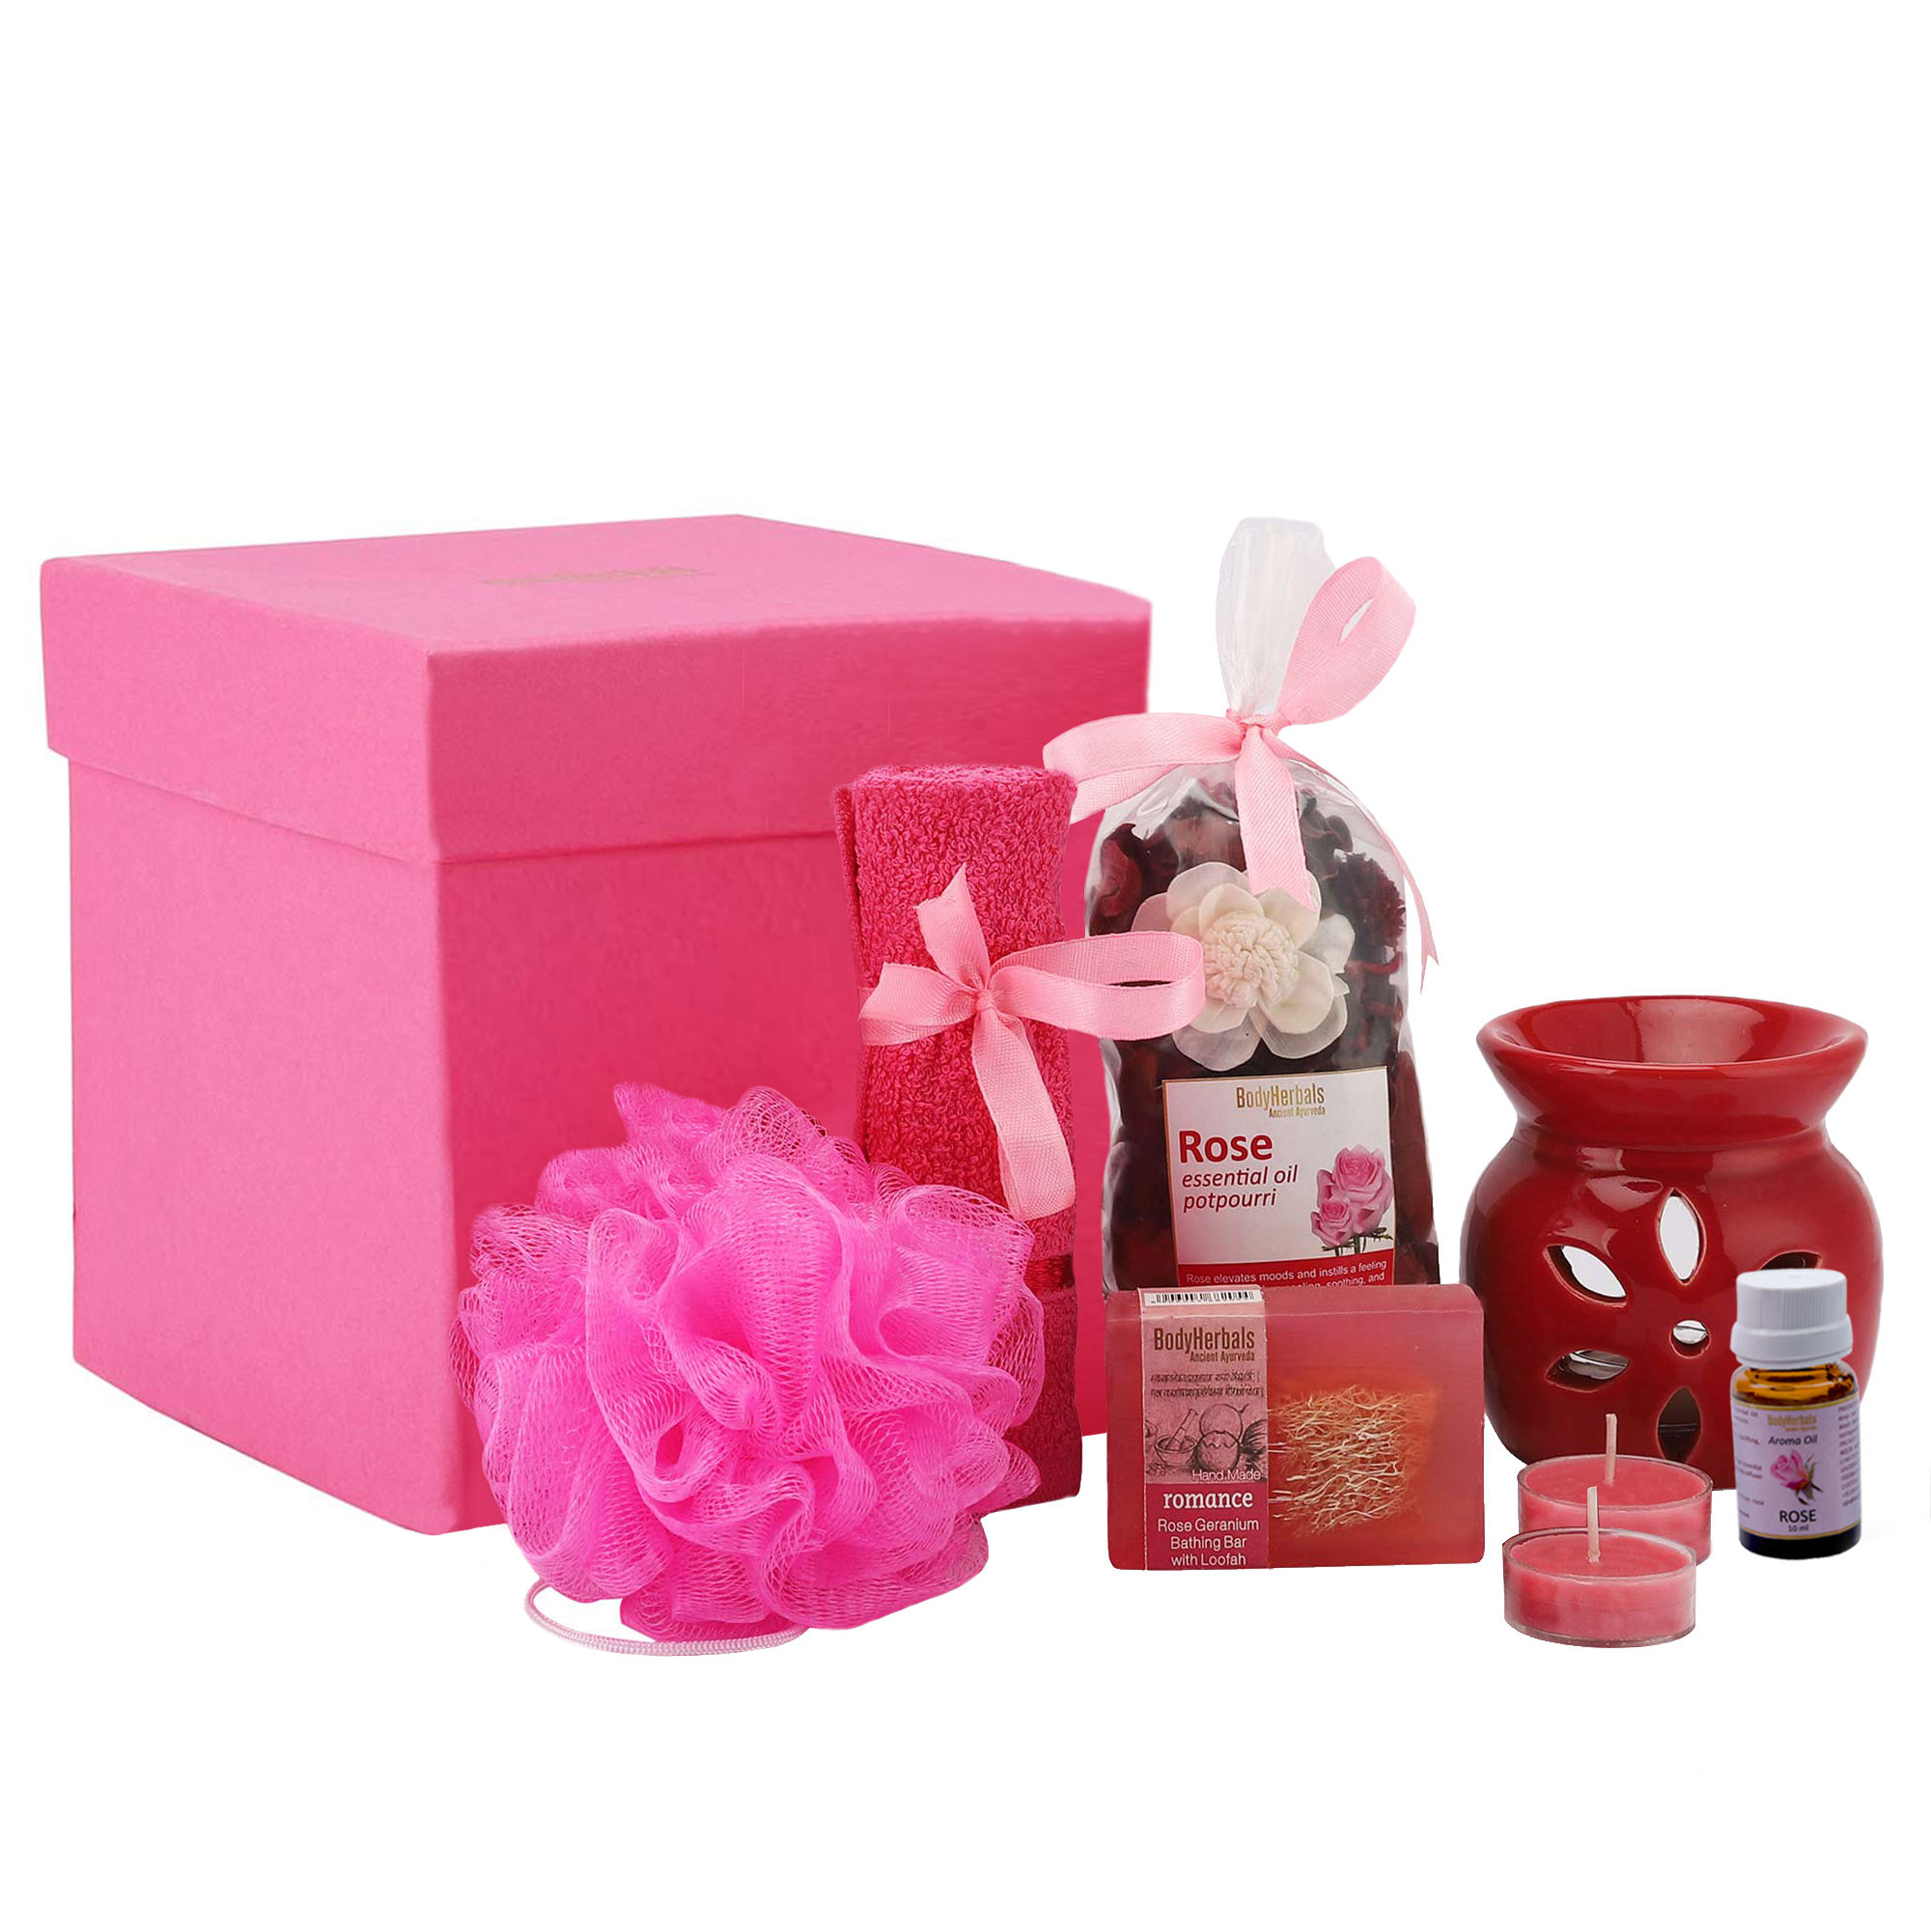 BodyHerbals Rose Soap Spa Set Gift Box - Gift Sets & Combos for Women & Men